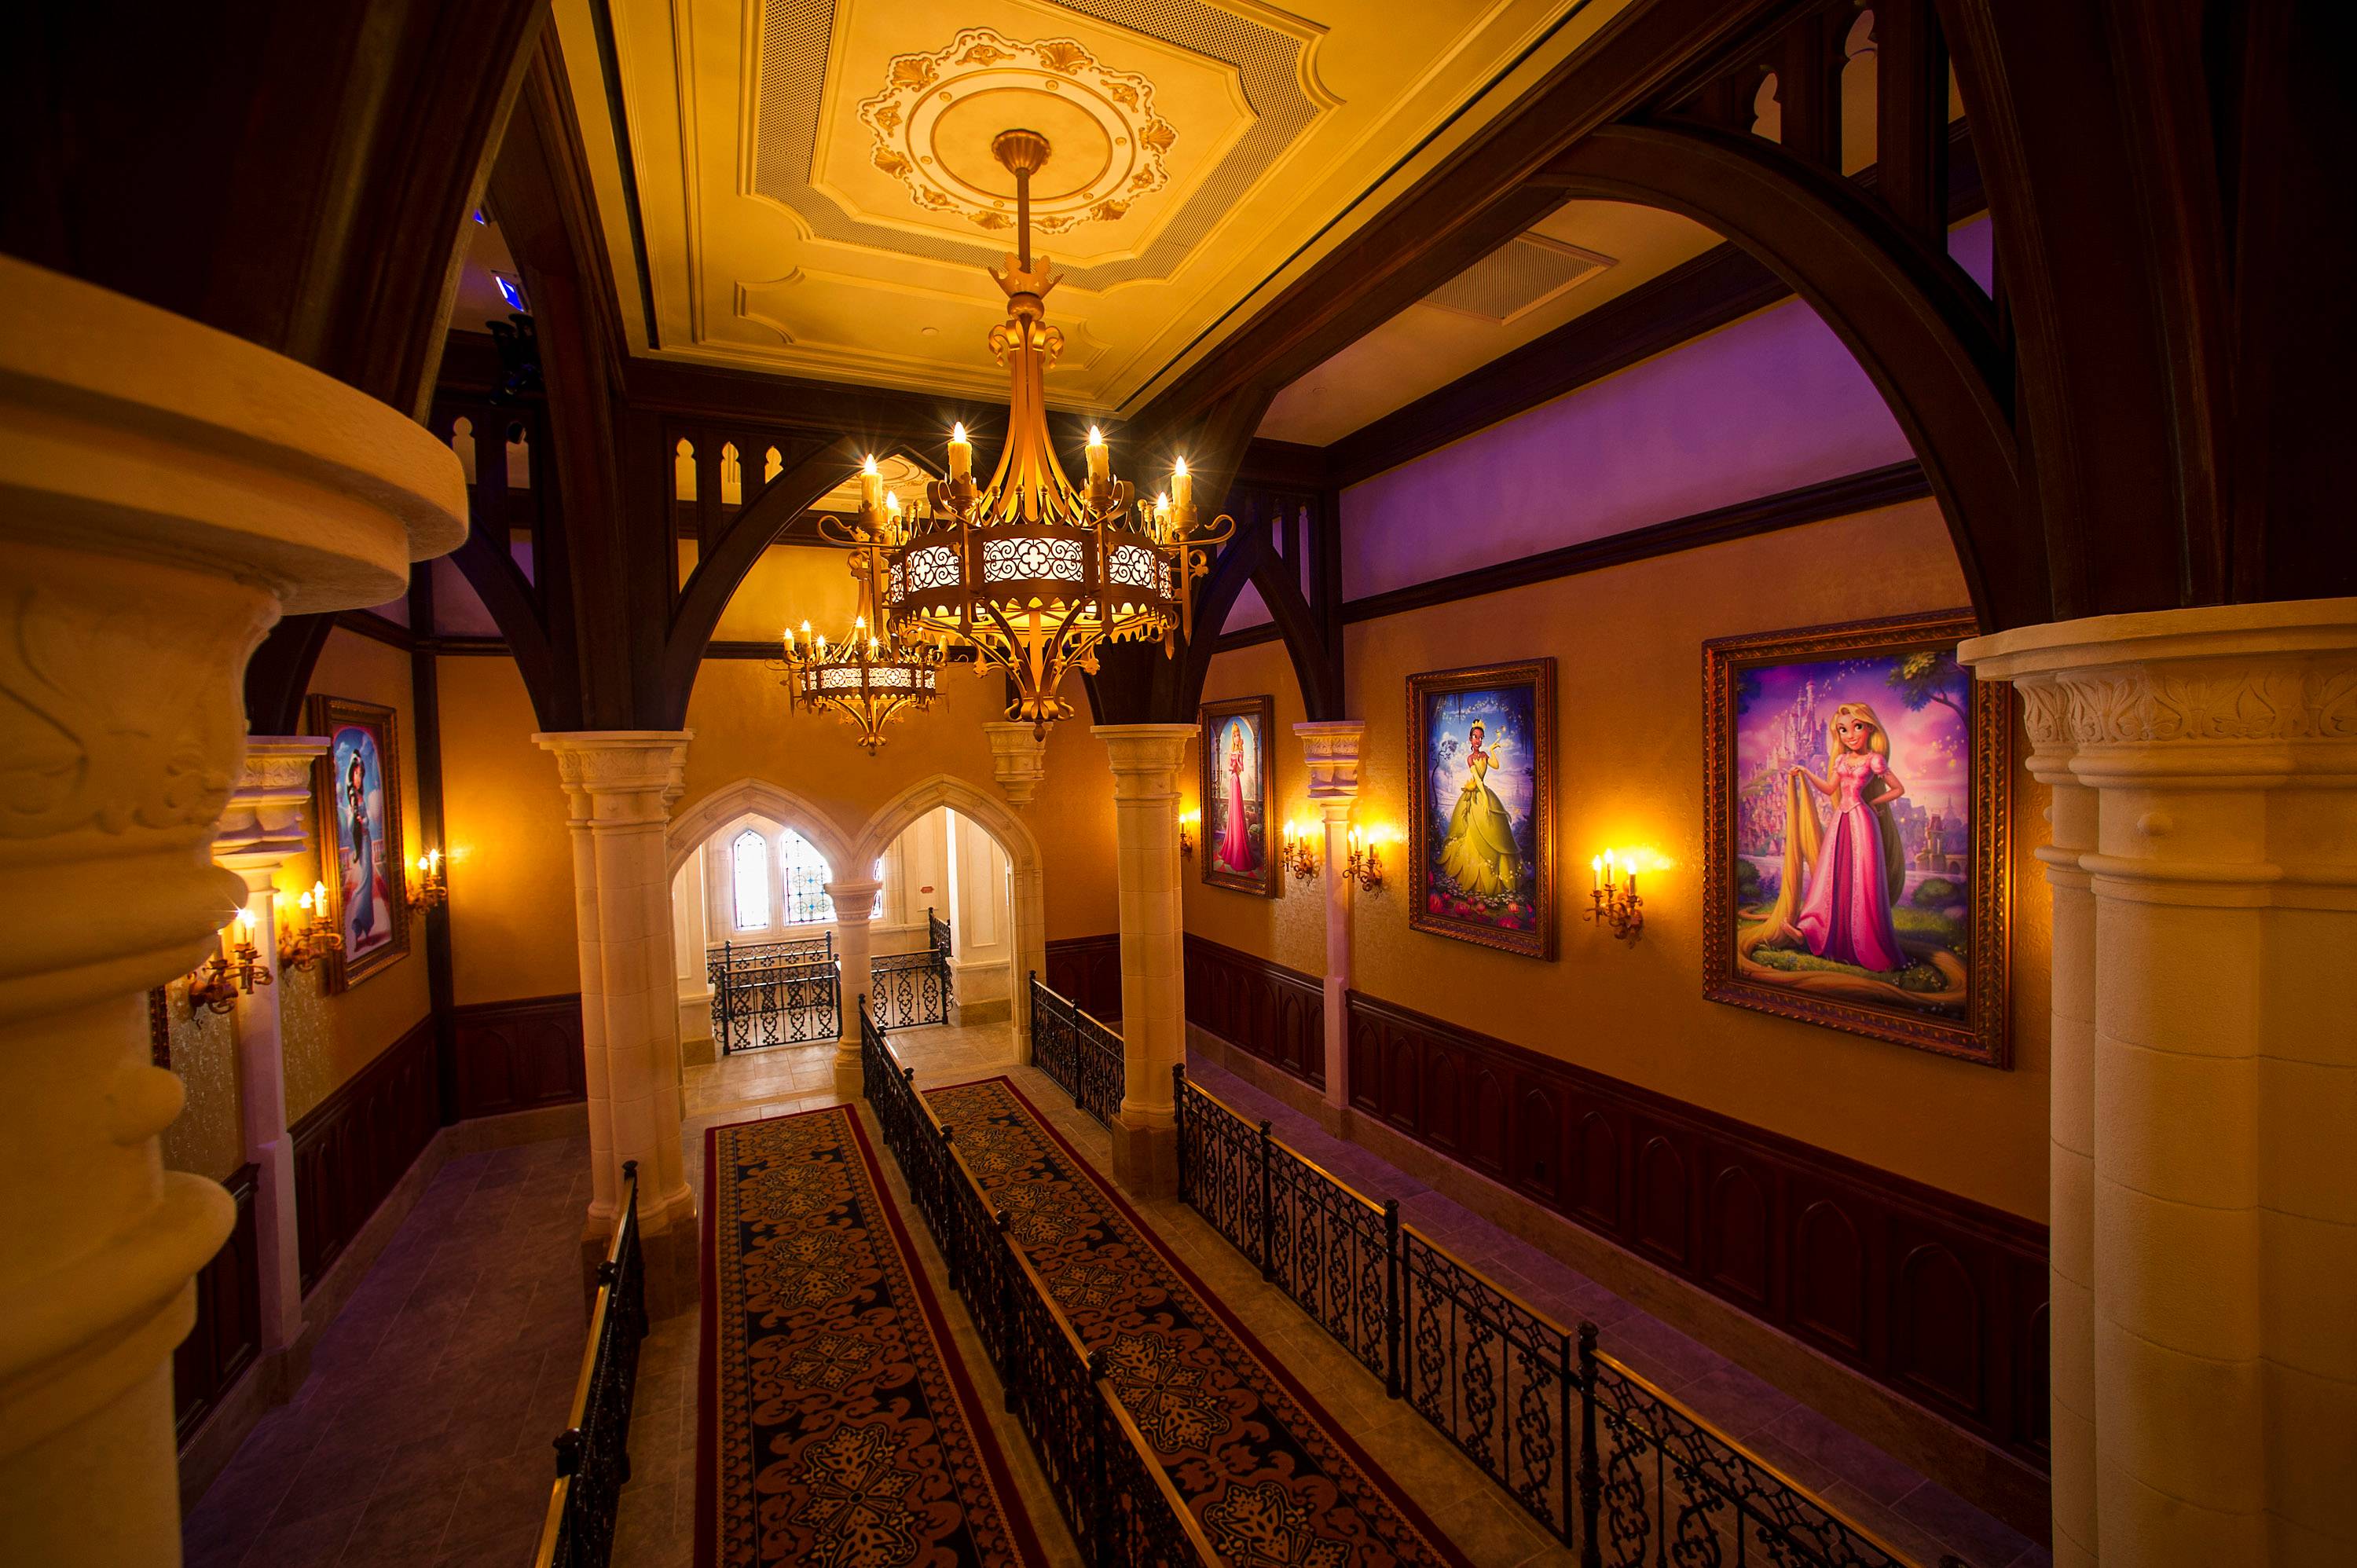 Frozen's Anna and Elsa meet and greet times to be extended at Princess Fairytale Hall